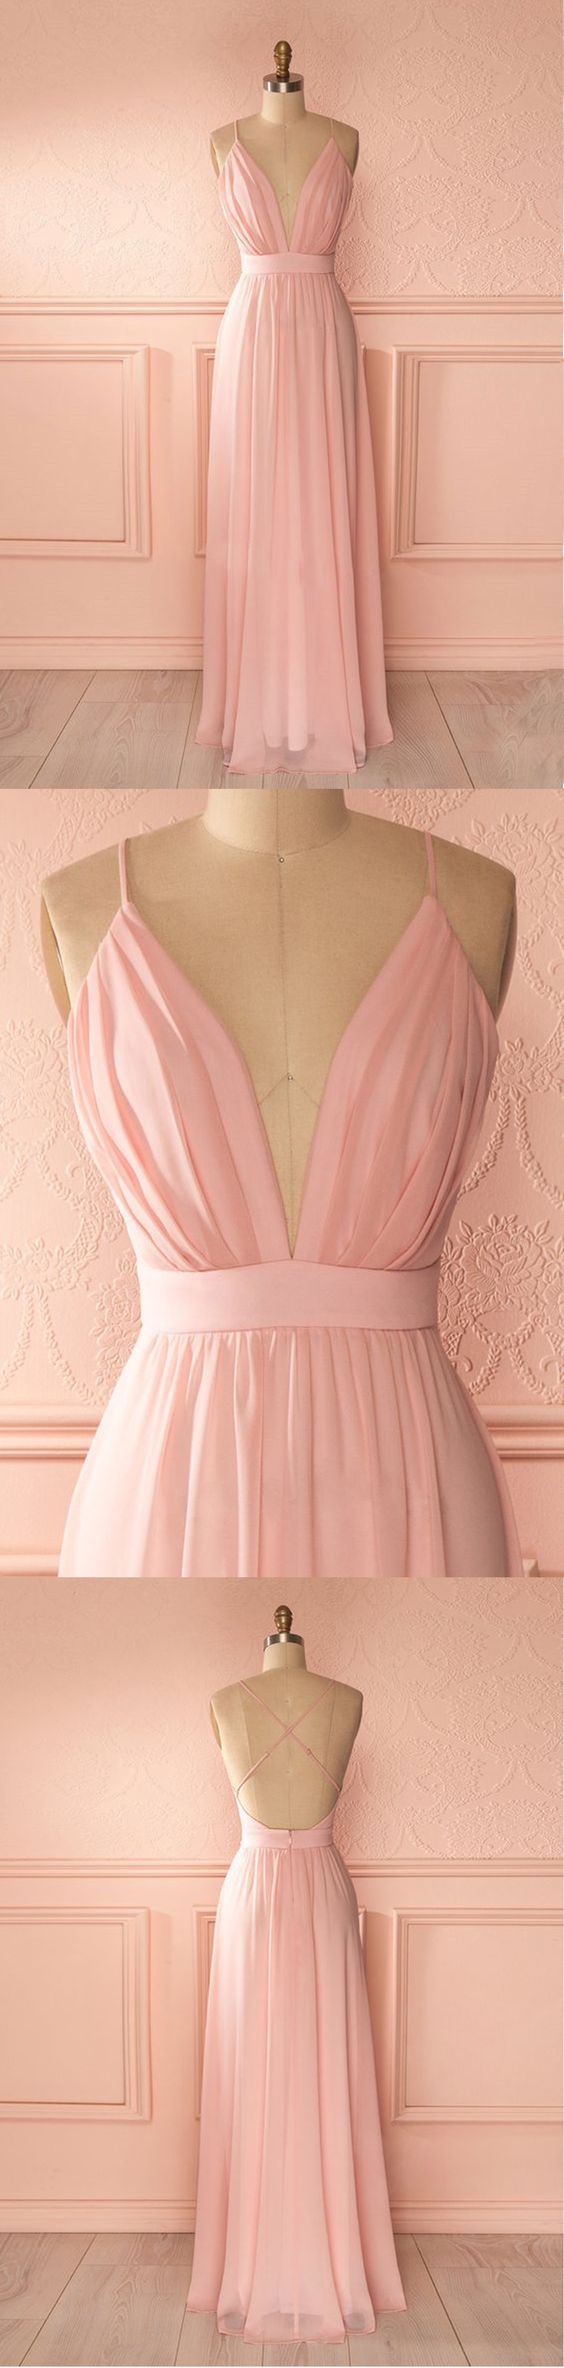 Pink Chiffon Bridesmaid Dresses Long Plunge V neck Prom Dress GDC1184-Dolly Gown